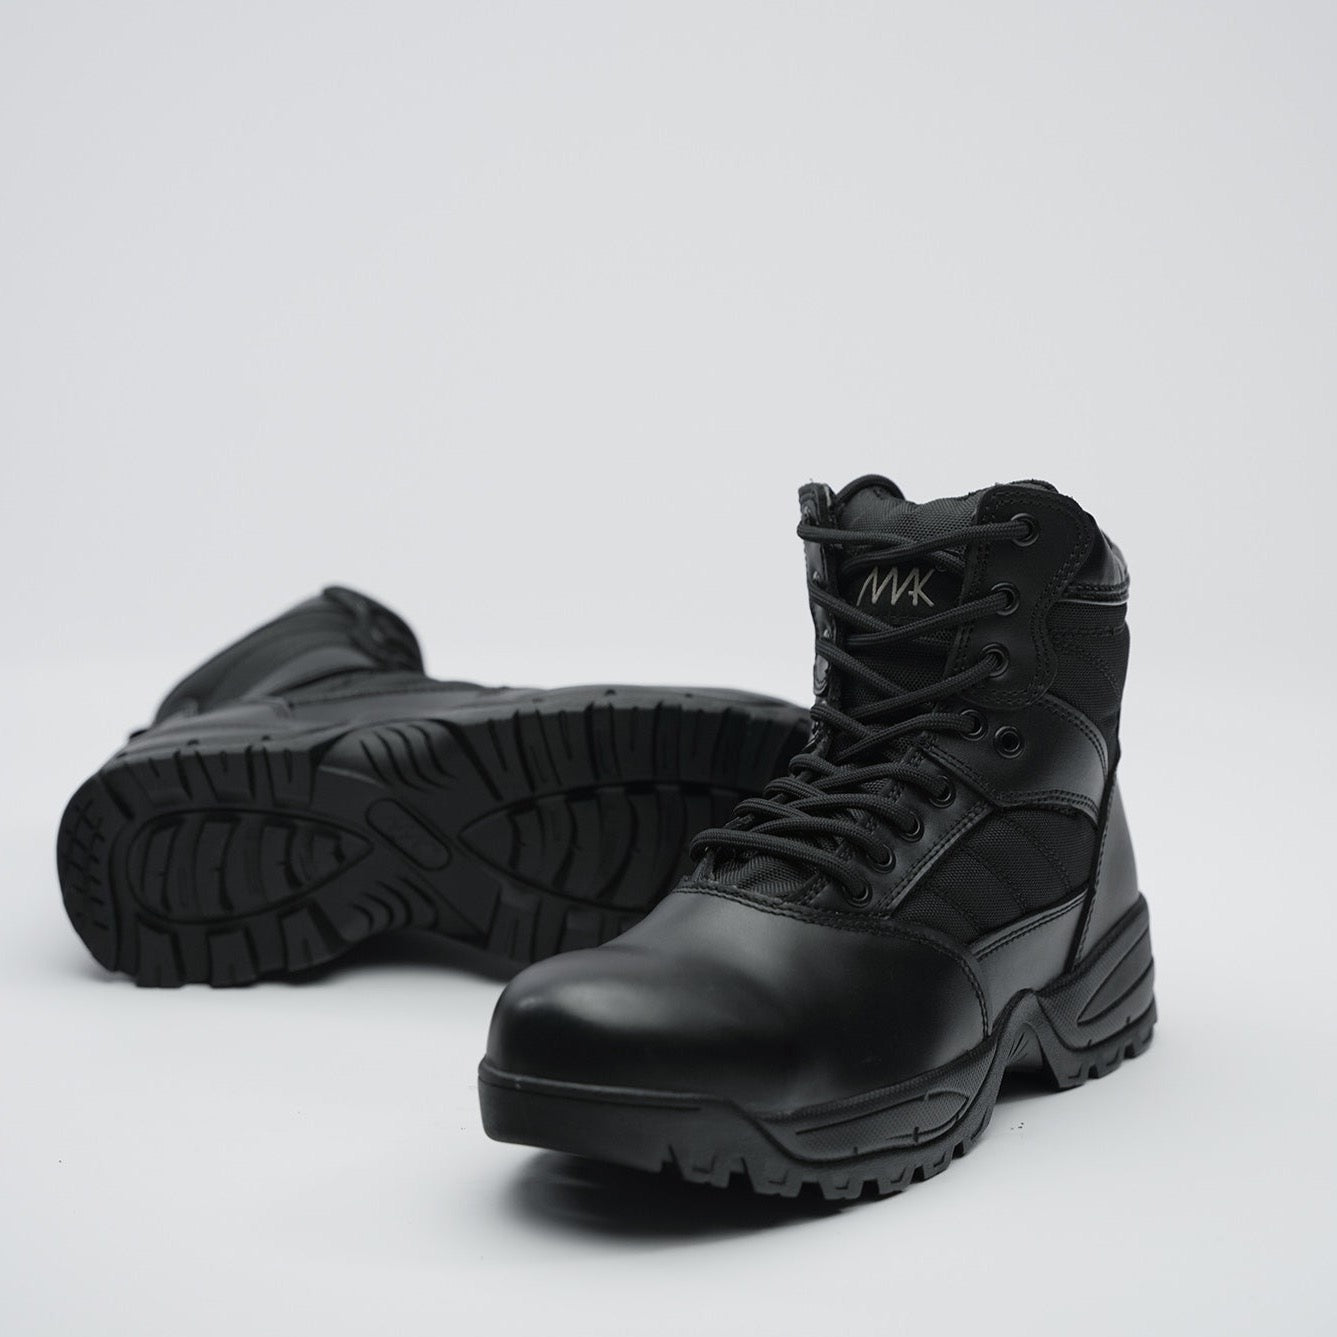 Mens Protector 8 Military boot